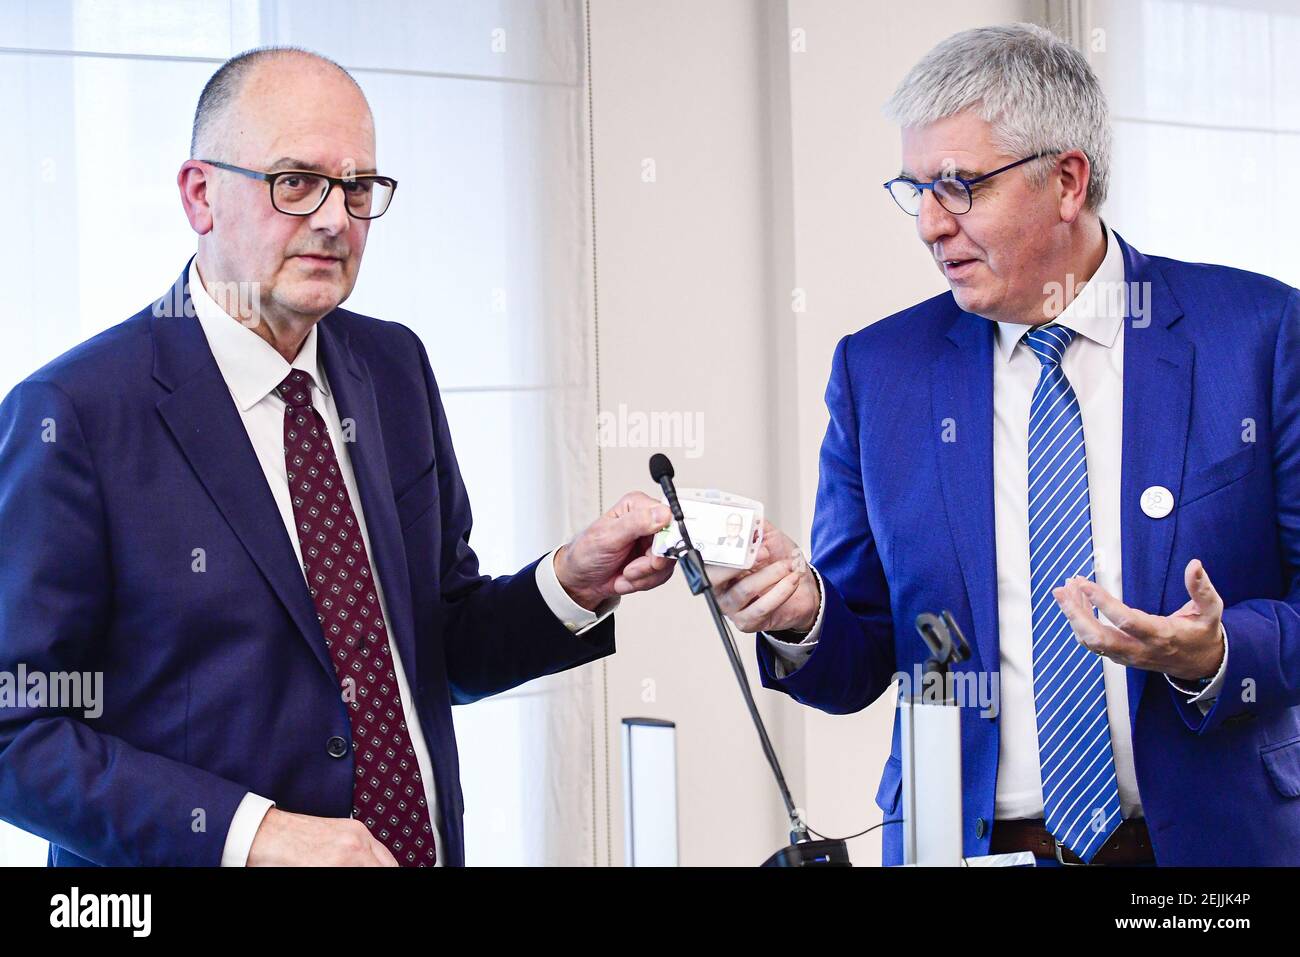 ATTENTION EDITORS - EMBARGO TILL 13 FEBRUARY 2020 - 18:00h Brussels time - New FEB-VBO president Bart De Smet and FEB-VBO CEO Pieter Timmermans pictured during the presentation of the new chairman of the VBO-FEB (Federation of Enterprises in Belgium - Verbond van Belgische Ondernemingen - Federation des Entreprises de Belgique) in Brussels, Thursday 13 February 2020. BELGA PHOTO LAURIE DIEFFEMBACQ (Photo by LAURIE DIEFFEMBACQ/Belga/Sipa USA) Stock Photo